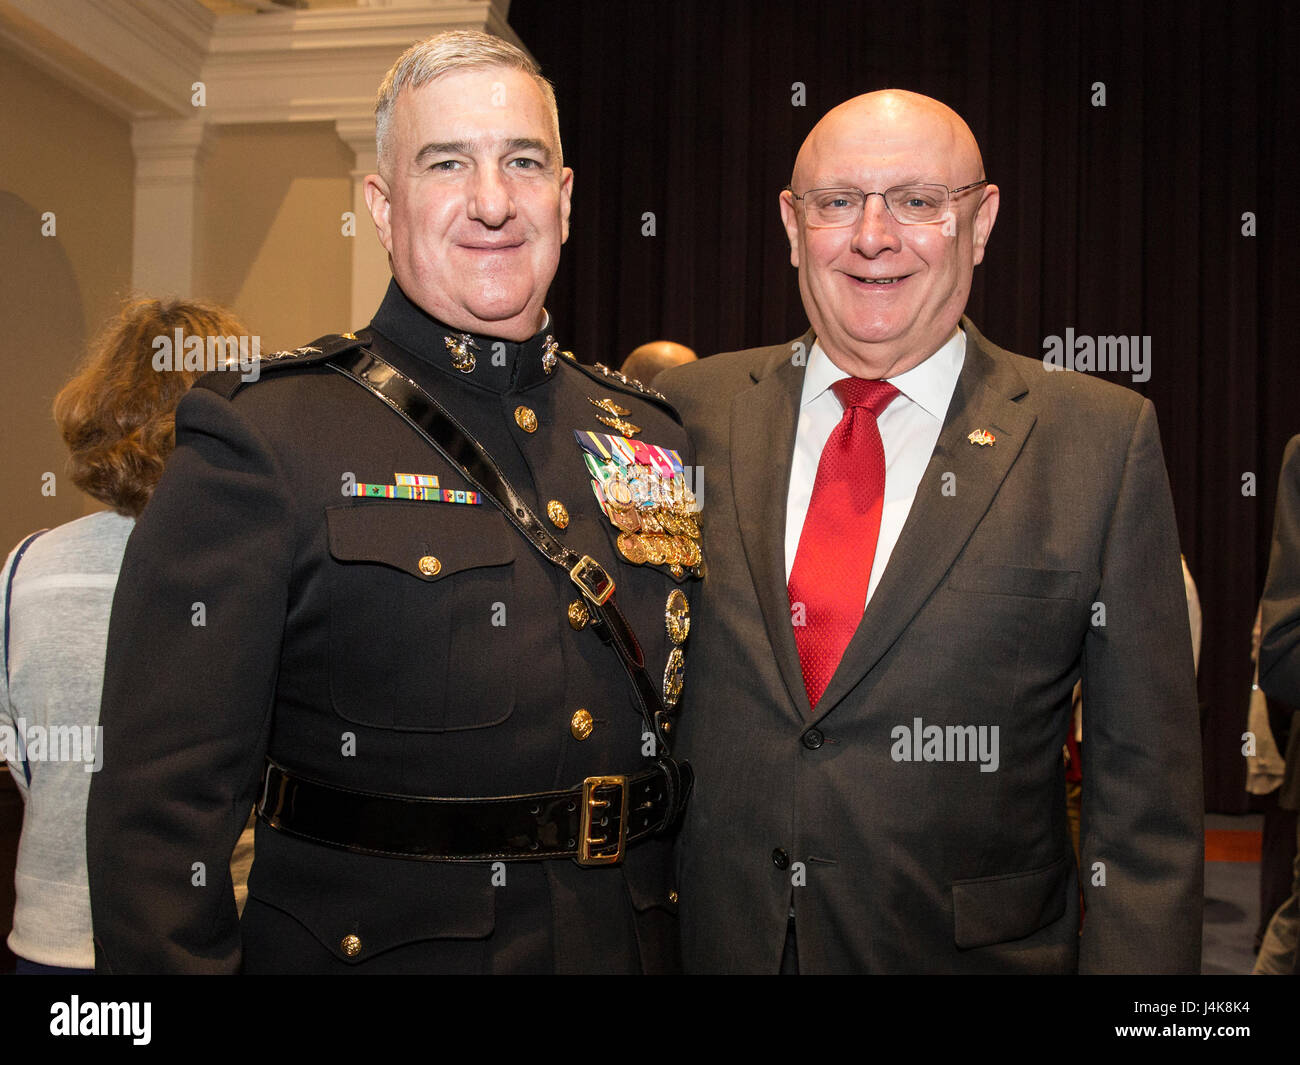 U.S. Marine Corps Gen. Glenn M. Walters, left, 34th assistant commandant of the Marine Corps, poses for a photo with a guest during a reception prior to an evening parade, Marine Barracks Washington, Washington, D.C., May 5, 2017. Evening parades are held as a means of honoring senior officials, distinguished citizens and supporters of the Marine Corps. (U.S. Marine Corps photo by Lance Cpl. Hailey D. Clay) Stock Photo